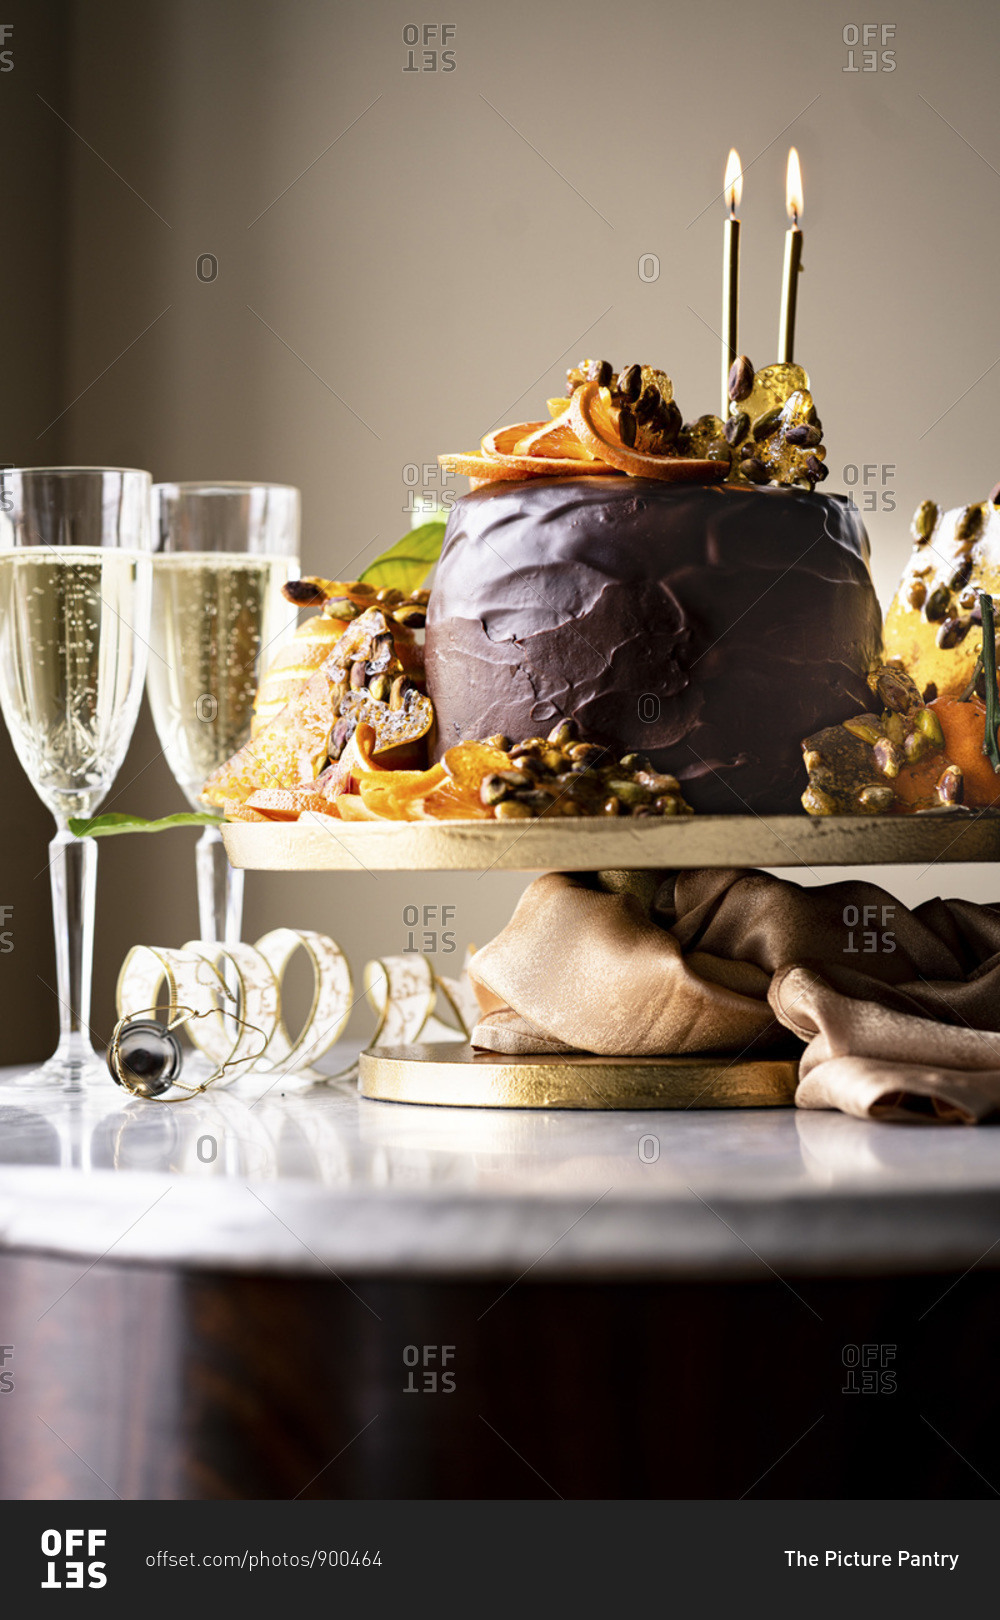 An Epic Gluten-free Chocolate Cake with ricotta cheese filling, chocolate frosting, chocolate glaze, orange slices and pistachio praline served with champagne.